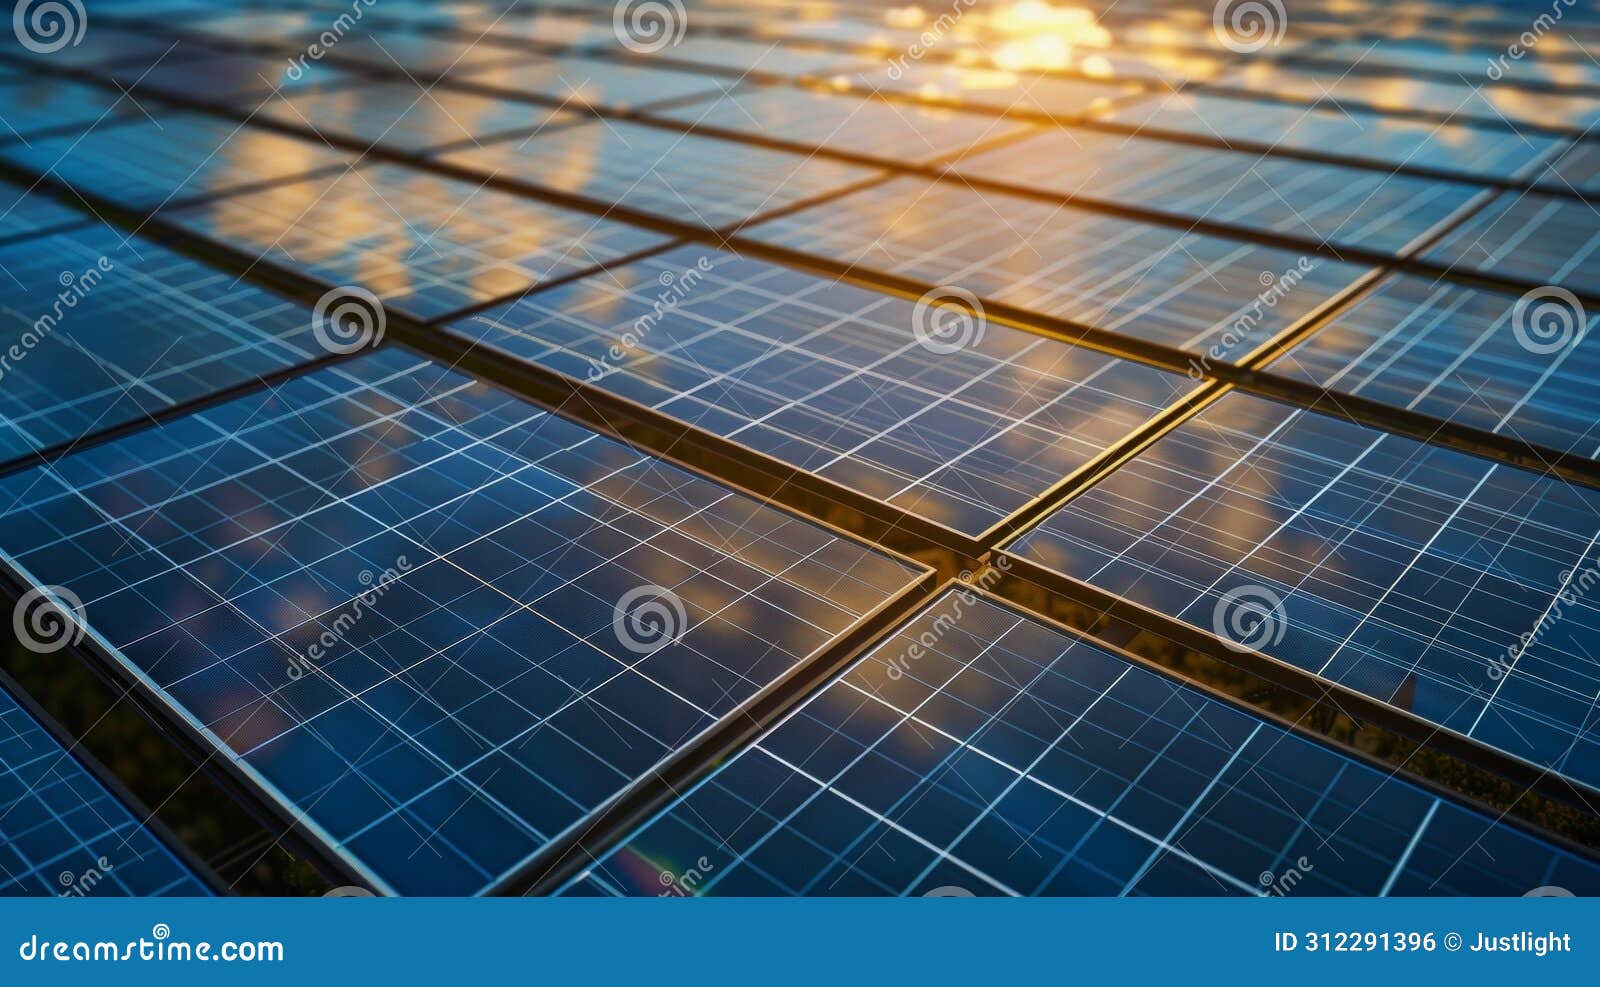 an aerial shot showcasing a largescale floating solar panel system covering a vast expanse of water providing renewable